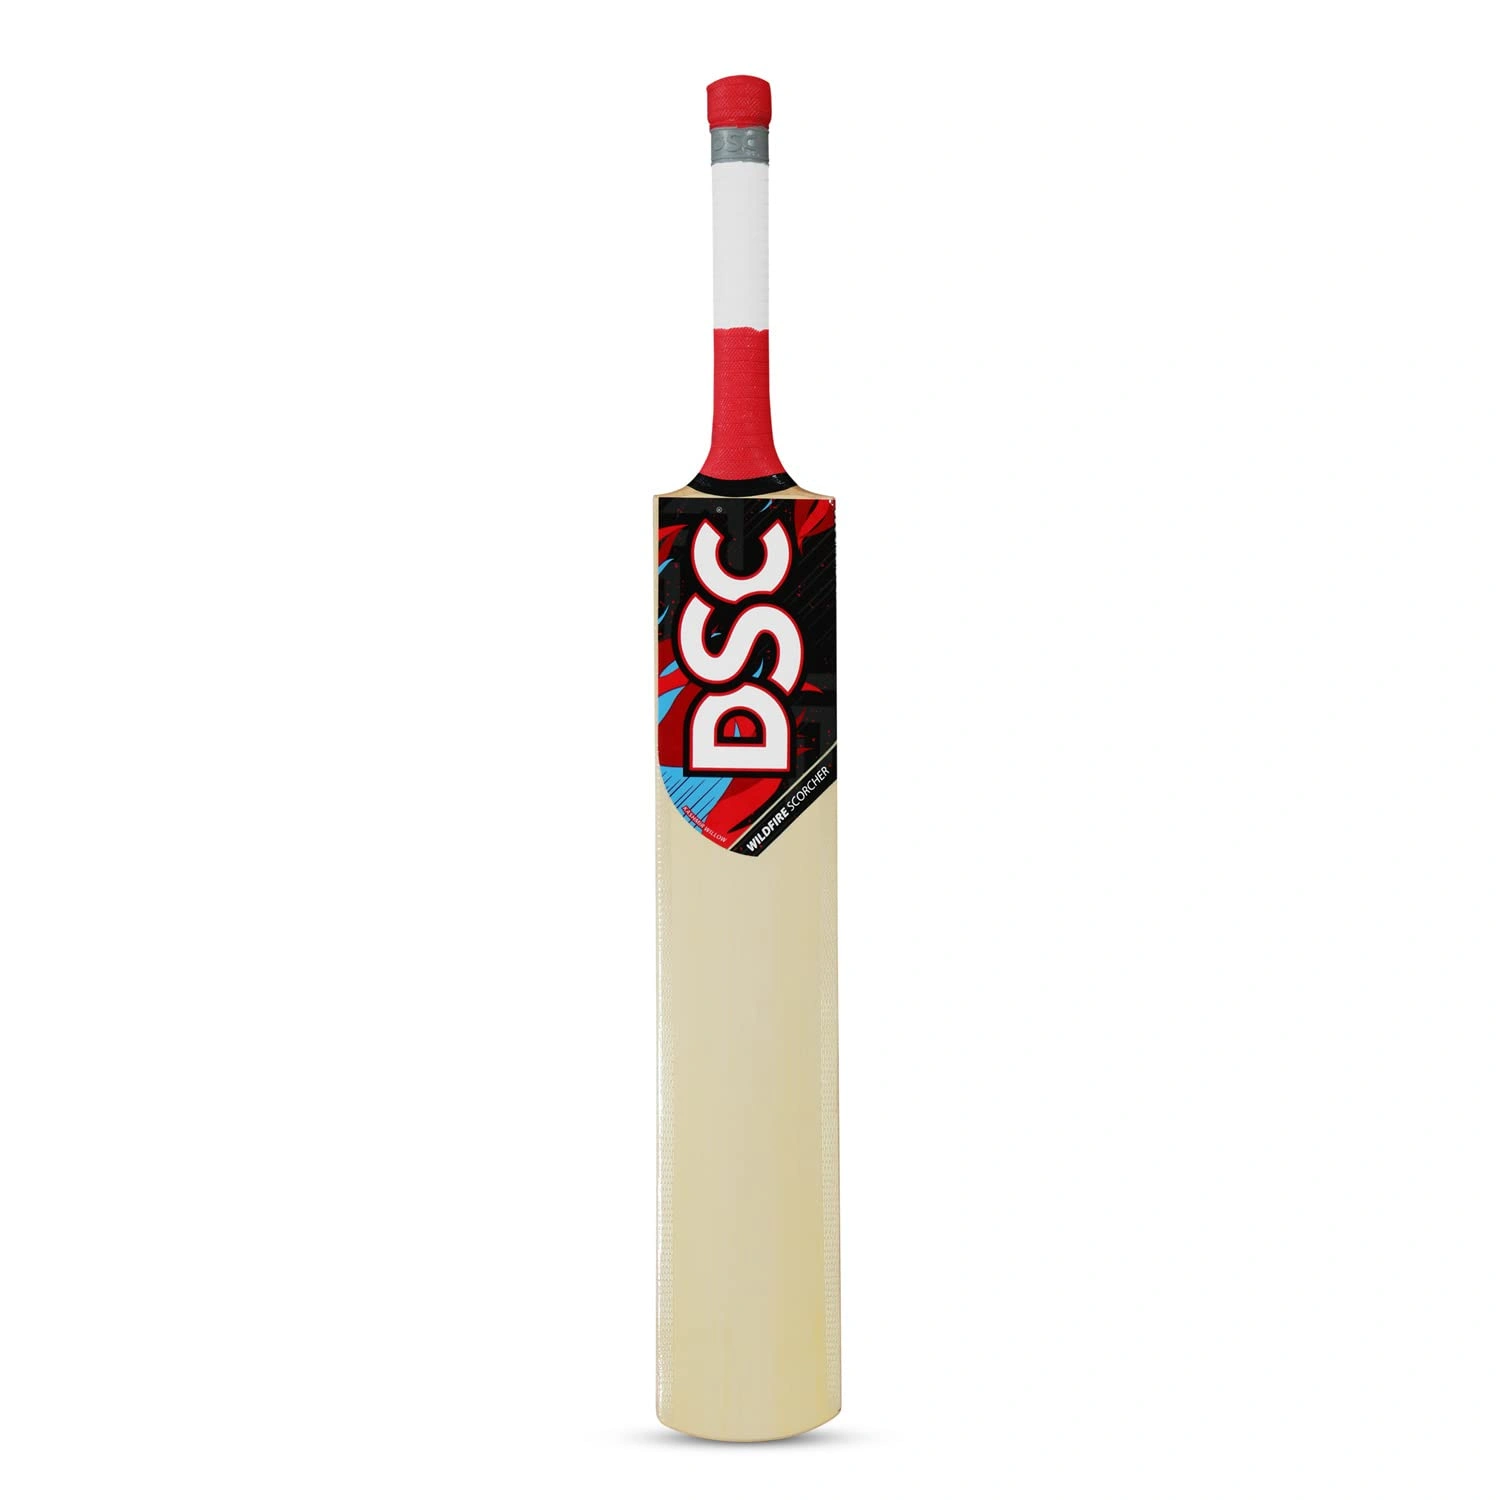 DSC Wildfire Scorcher Kashmir Willow Cricket Bat for Tennis Ball Cricket: Low Sweet Spot and Spine Profile for Powerful Shots-FS-1